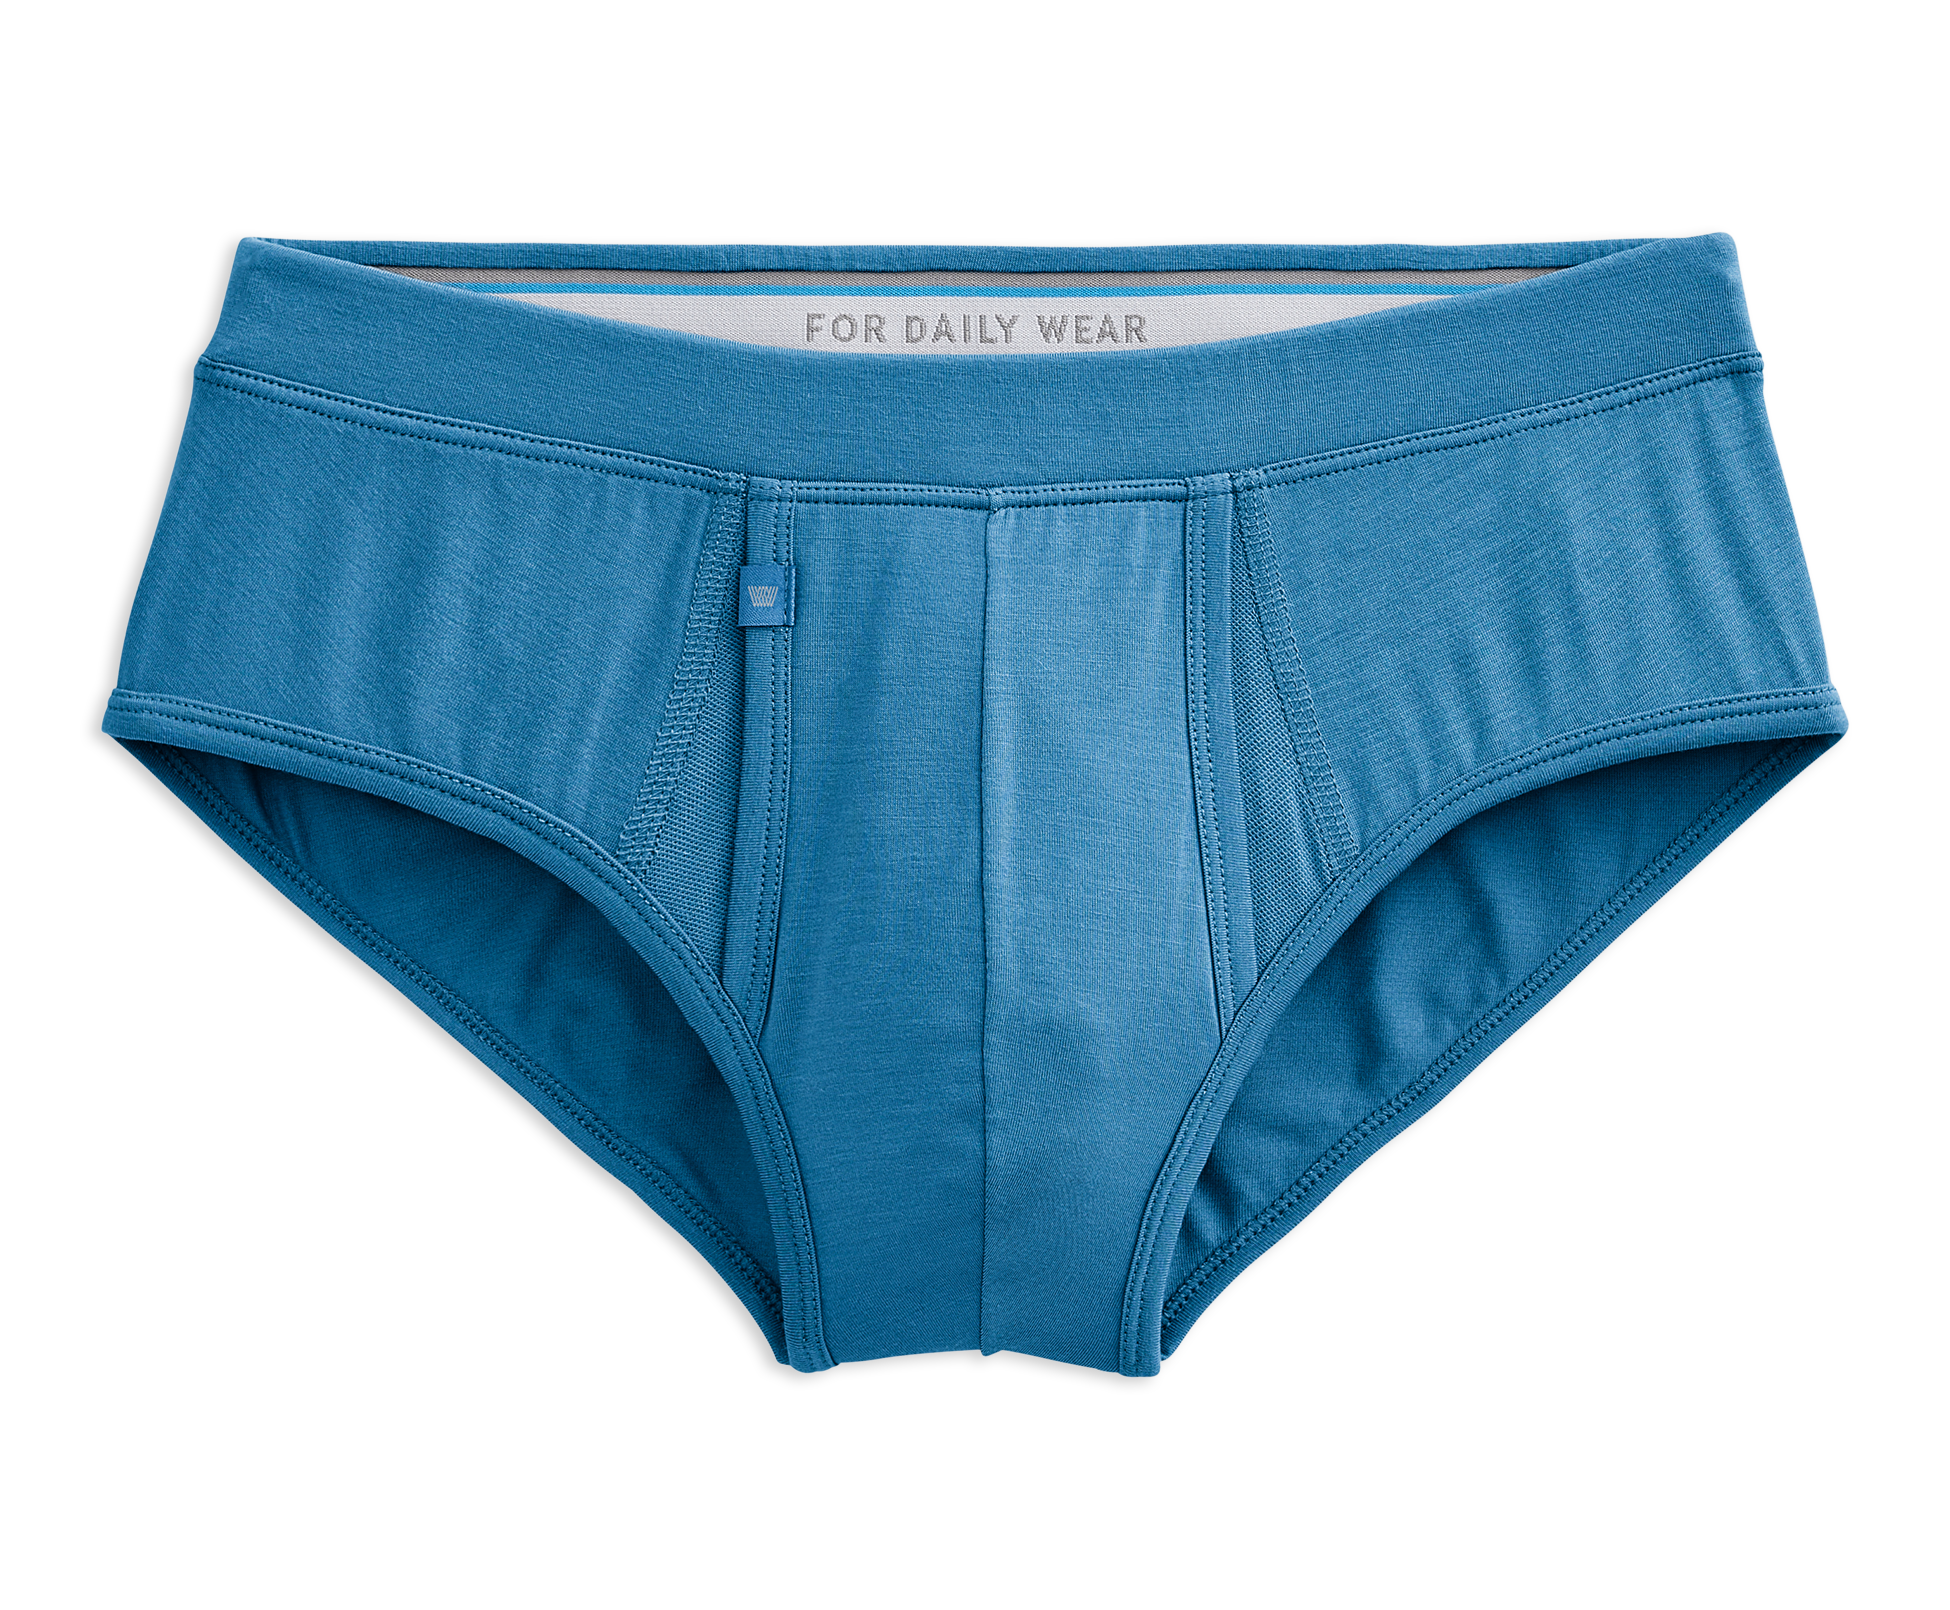 Mack Weldon Underwear: What You Need to Know [Guide]